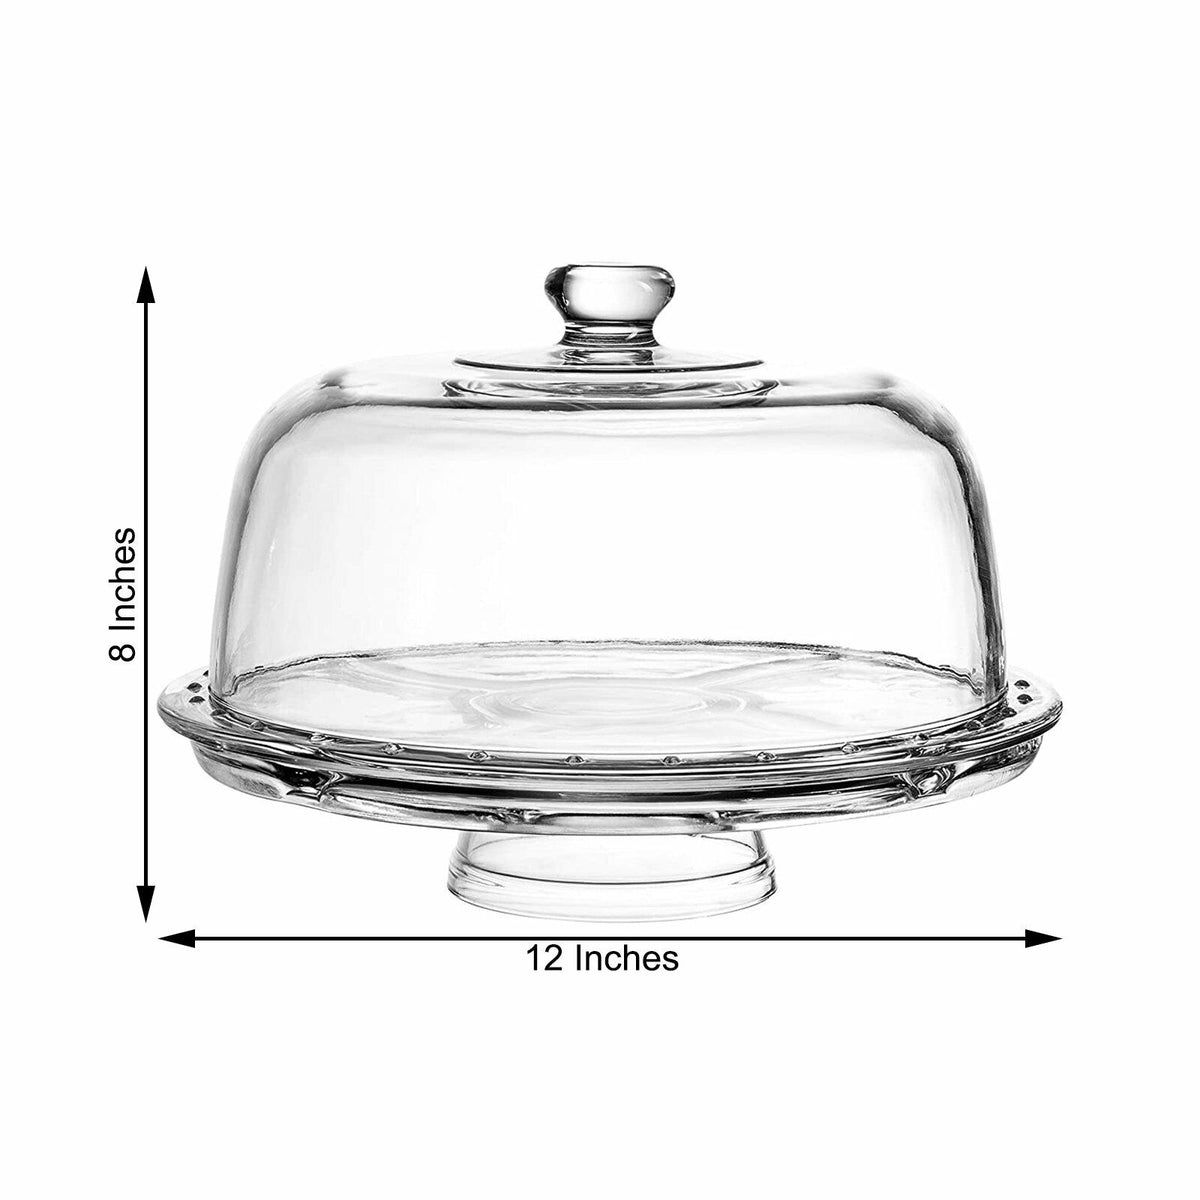 12" Clear Acrylic Cake Stand Serving Platter Wedding Home Party Decor